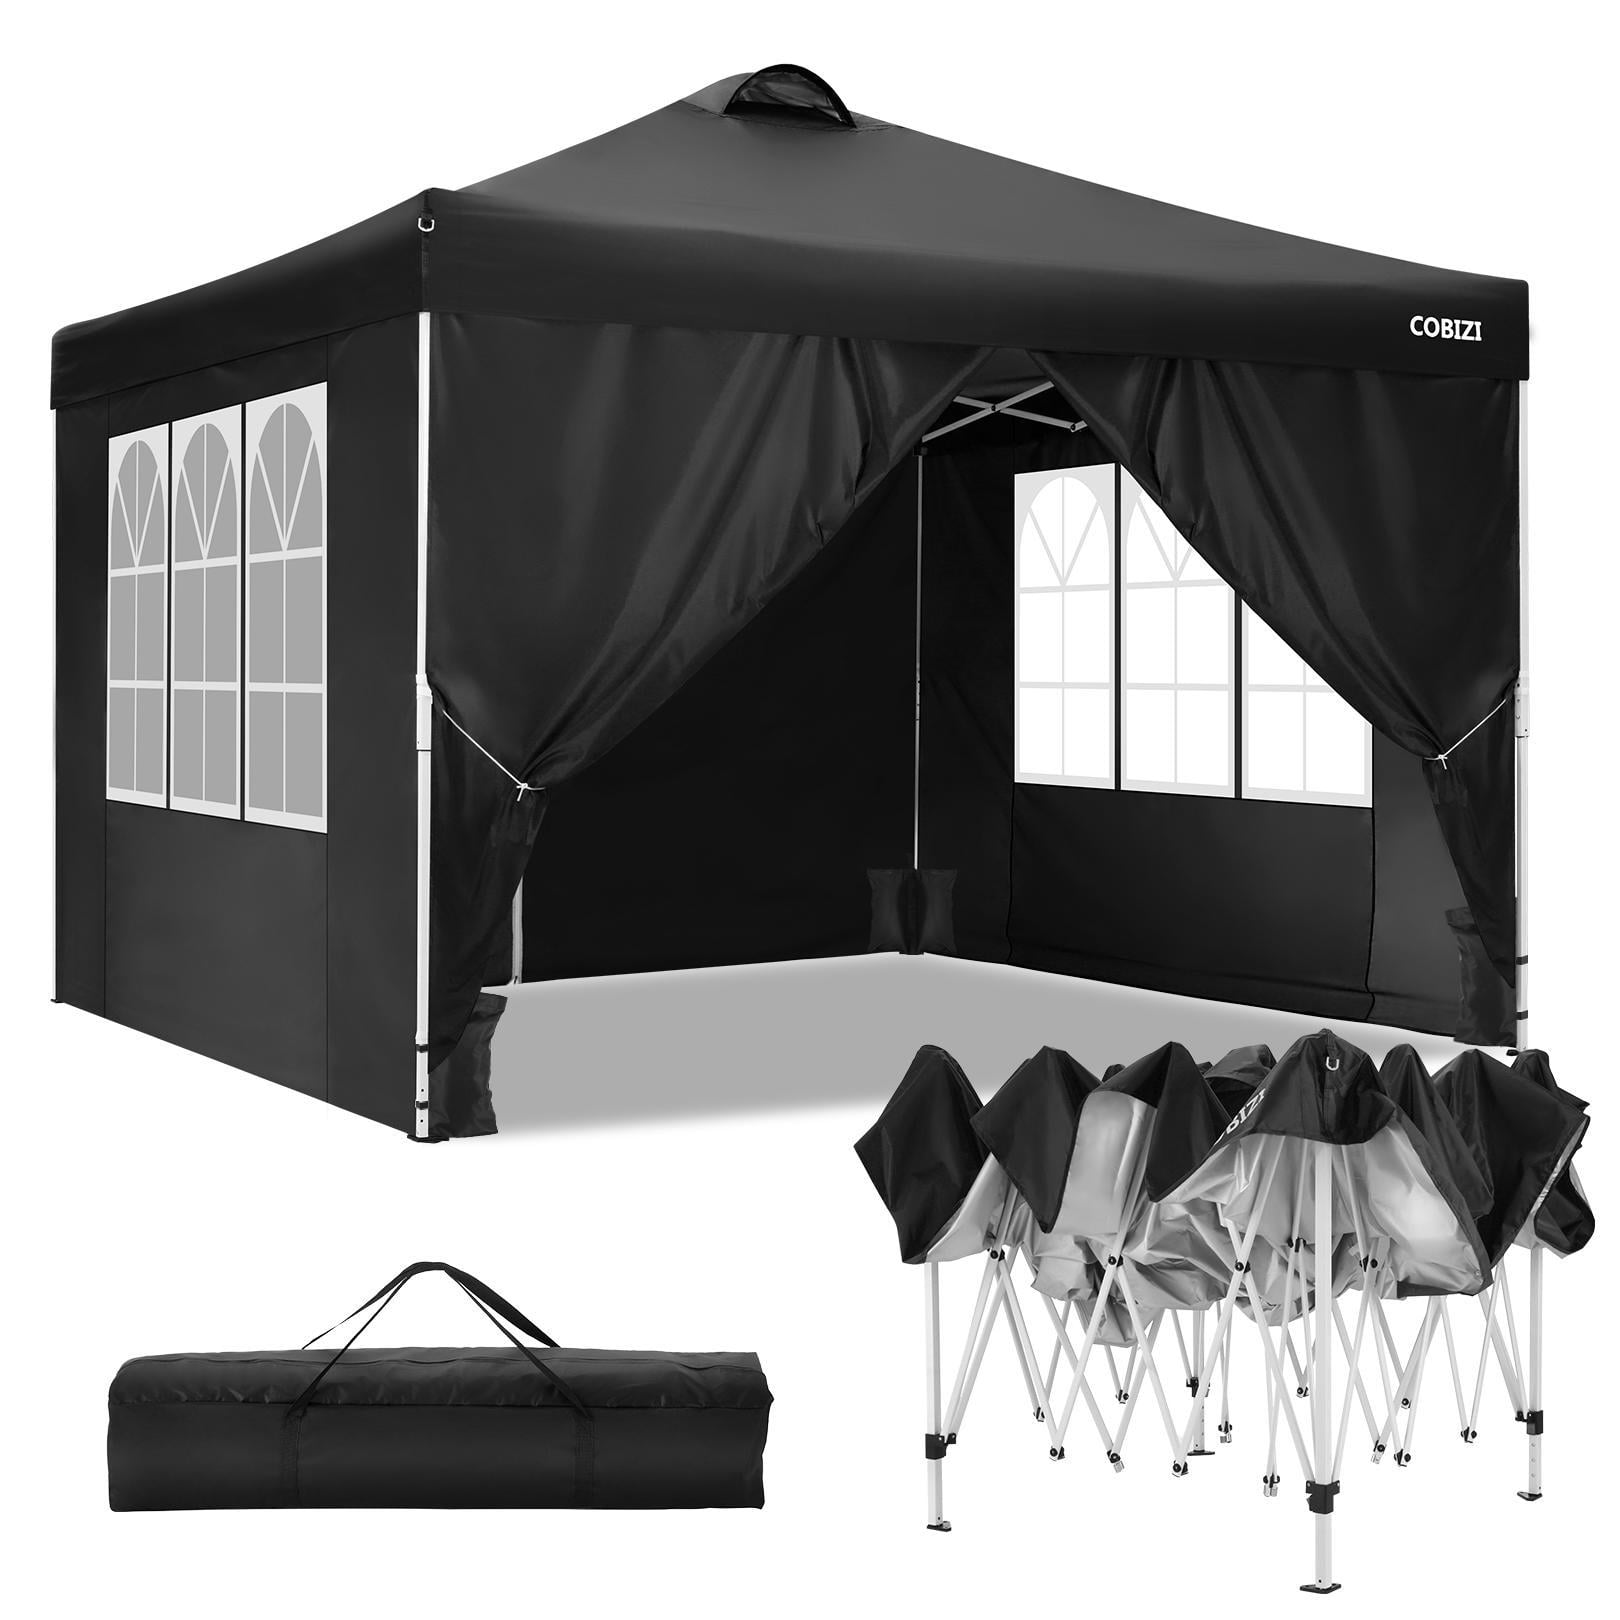 COBIZI Canopies 10'x10' Pop Up Instant Waterproof Canopy Tent with 4 Side Walls 